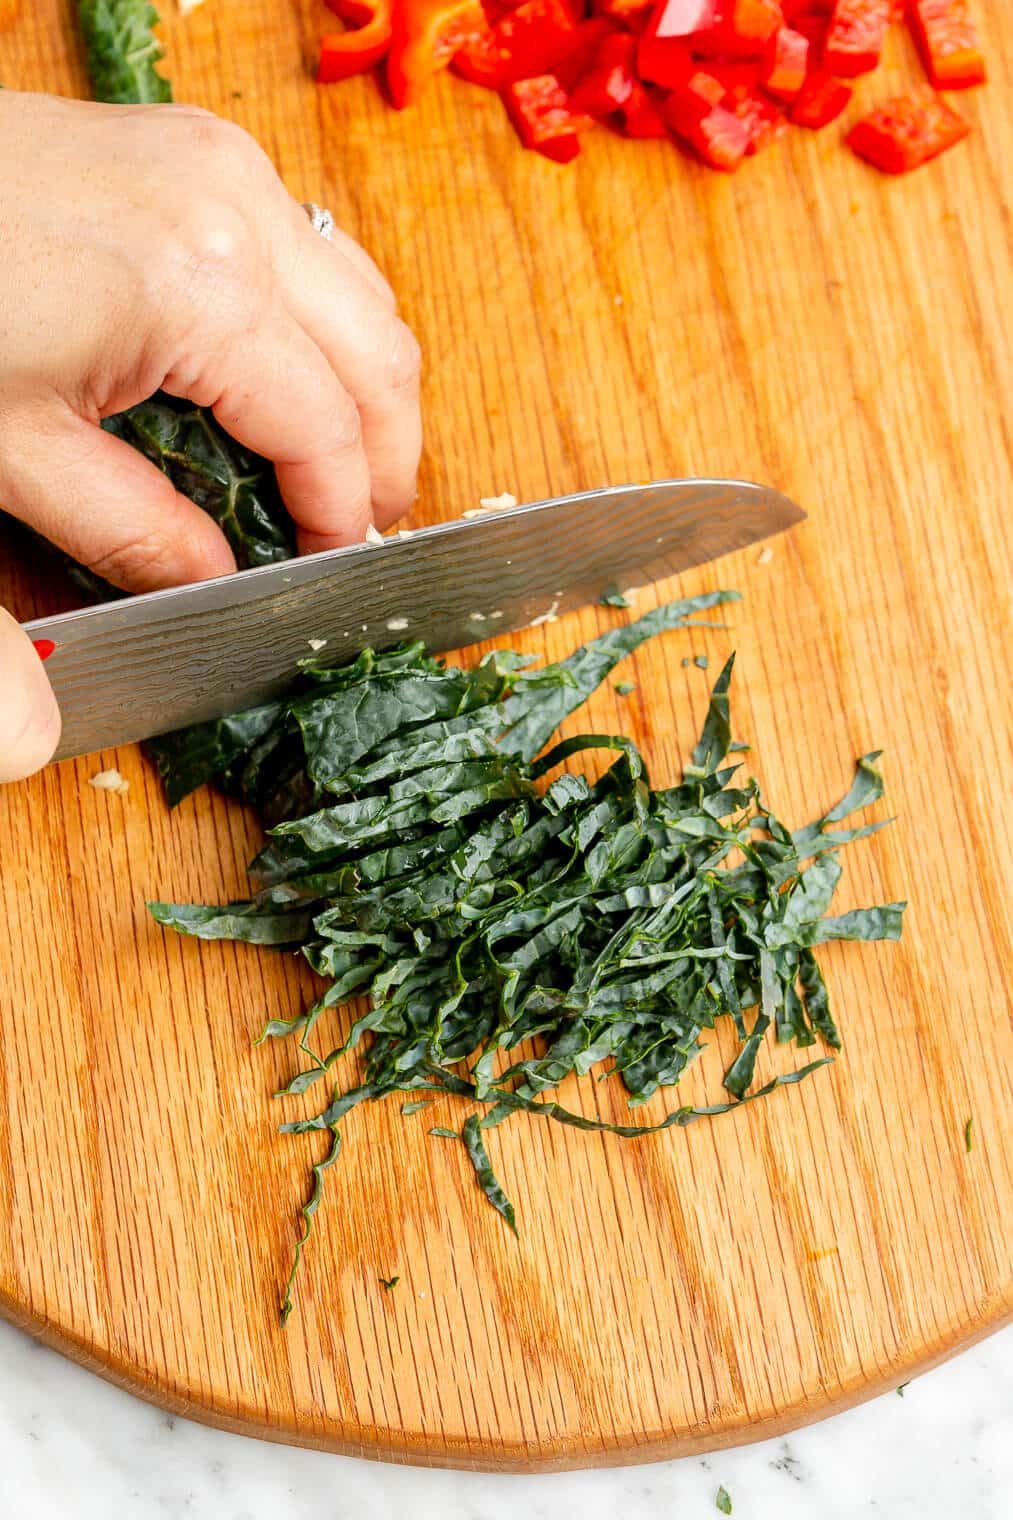 Hand shredding kale with a butcher knife on a wooden cutting board.